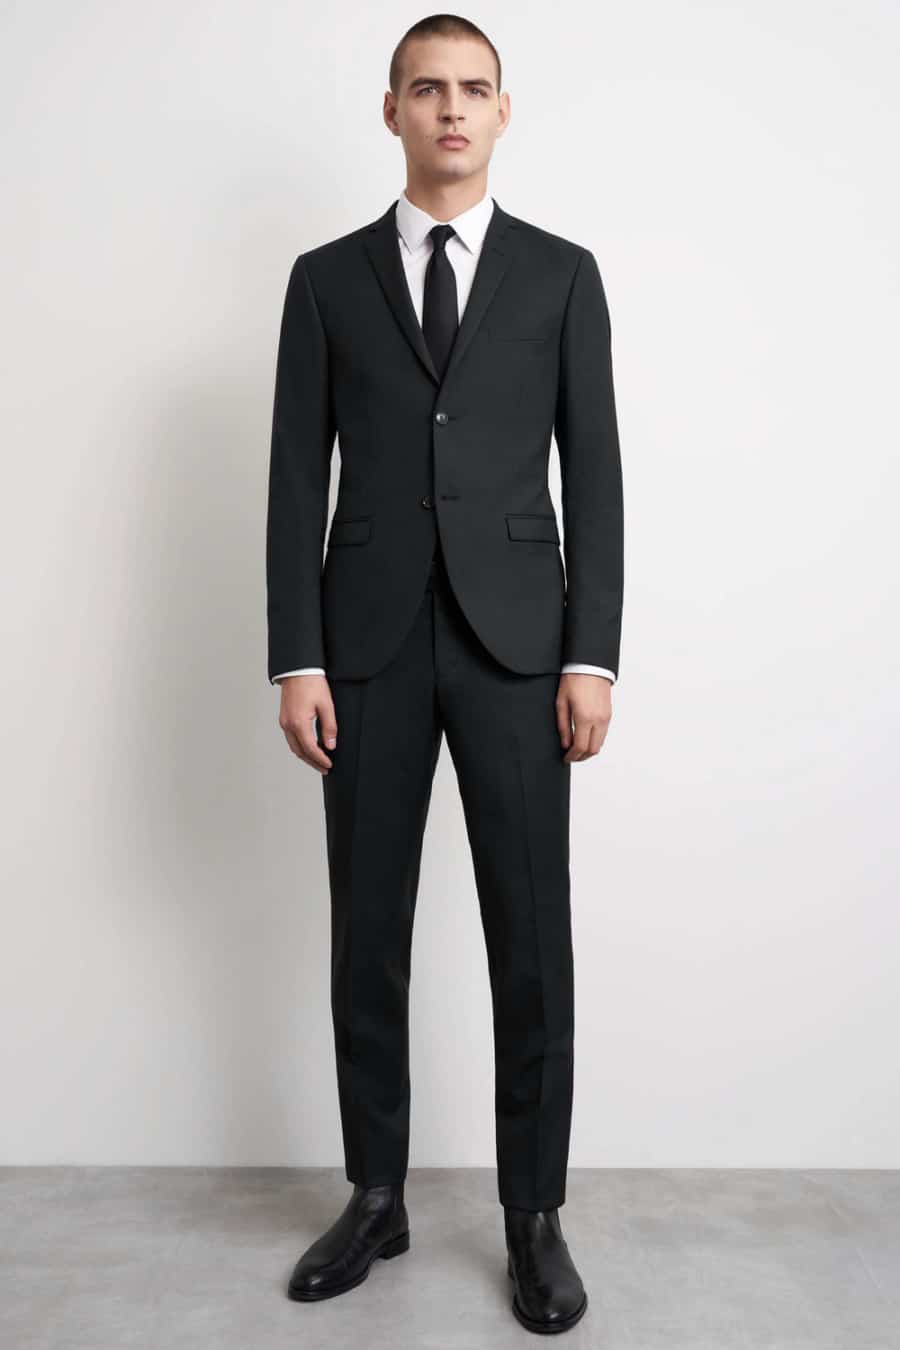 Men's black suit, white shirt, black tie and black leather Chelsea boots outfit